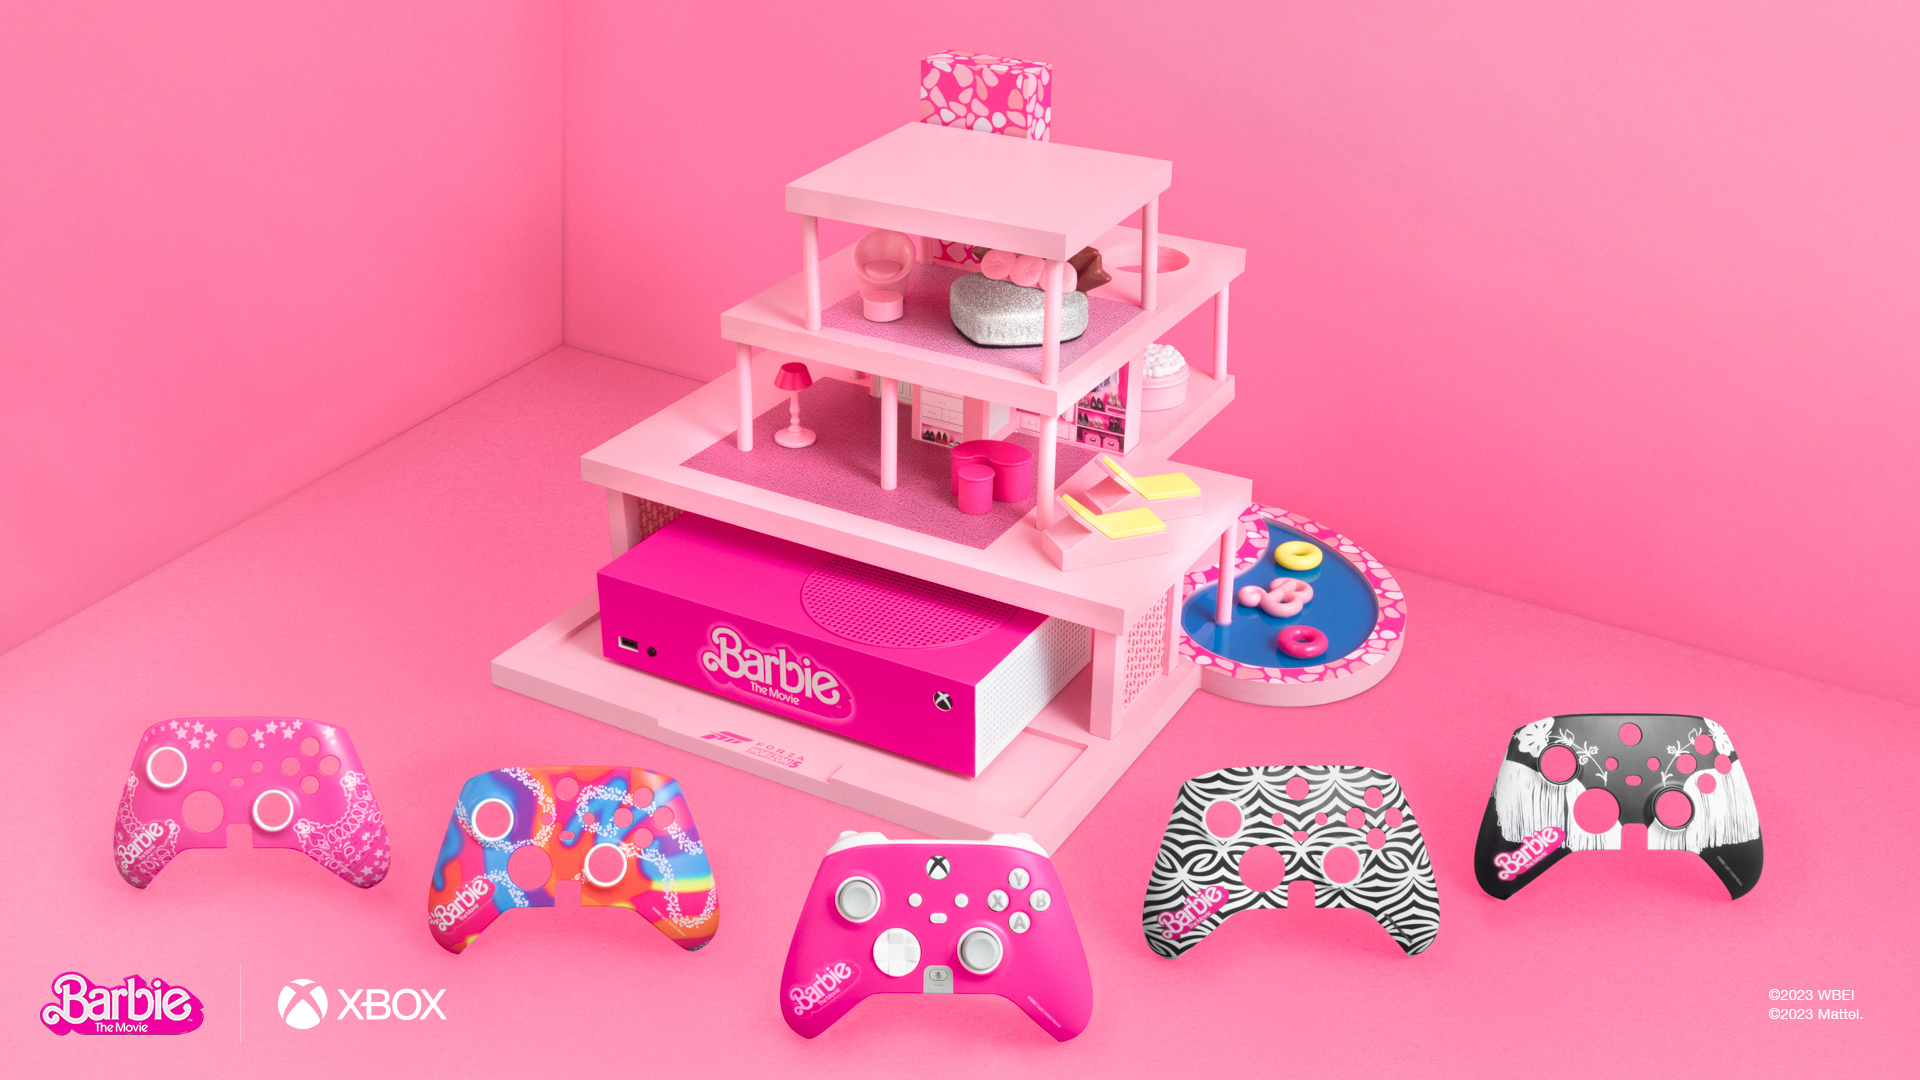 Xbox And Barbie Collaboration: Special Edition Console And Dolls